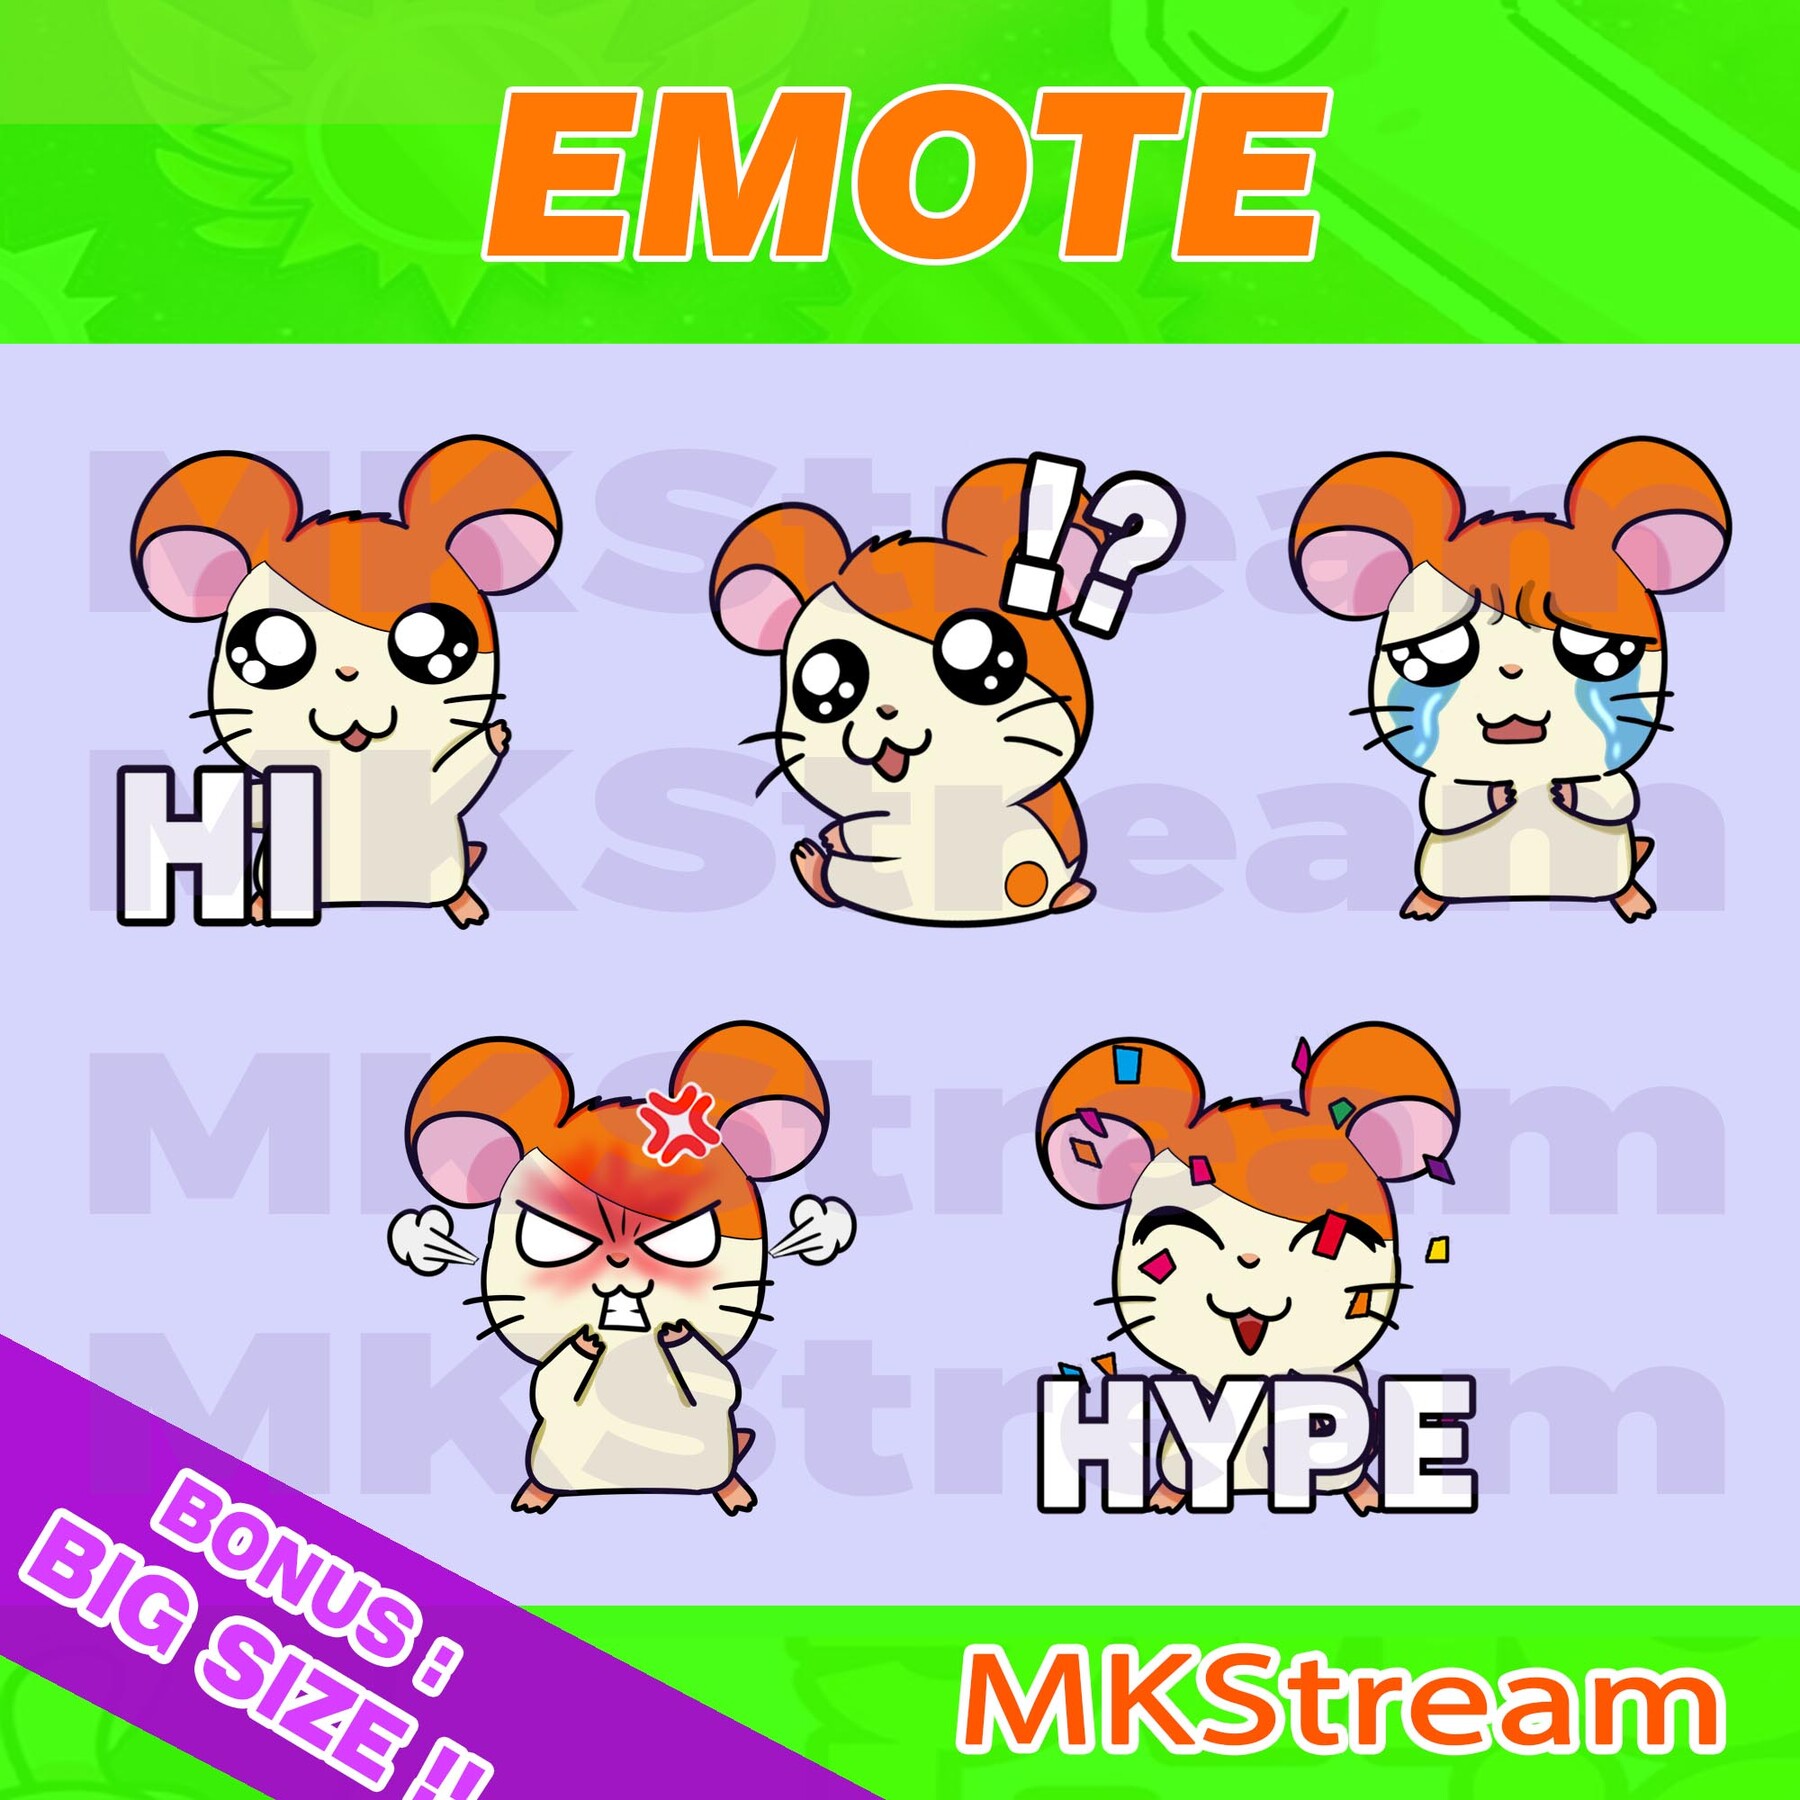 Cute Hamster Sub badges for twitch or stiker